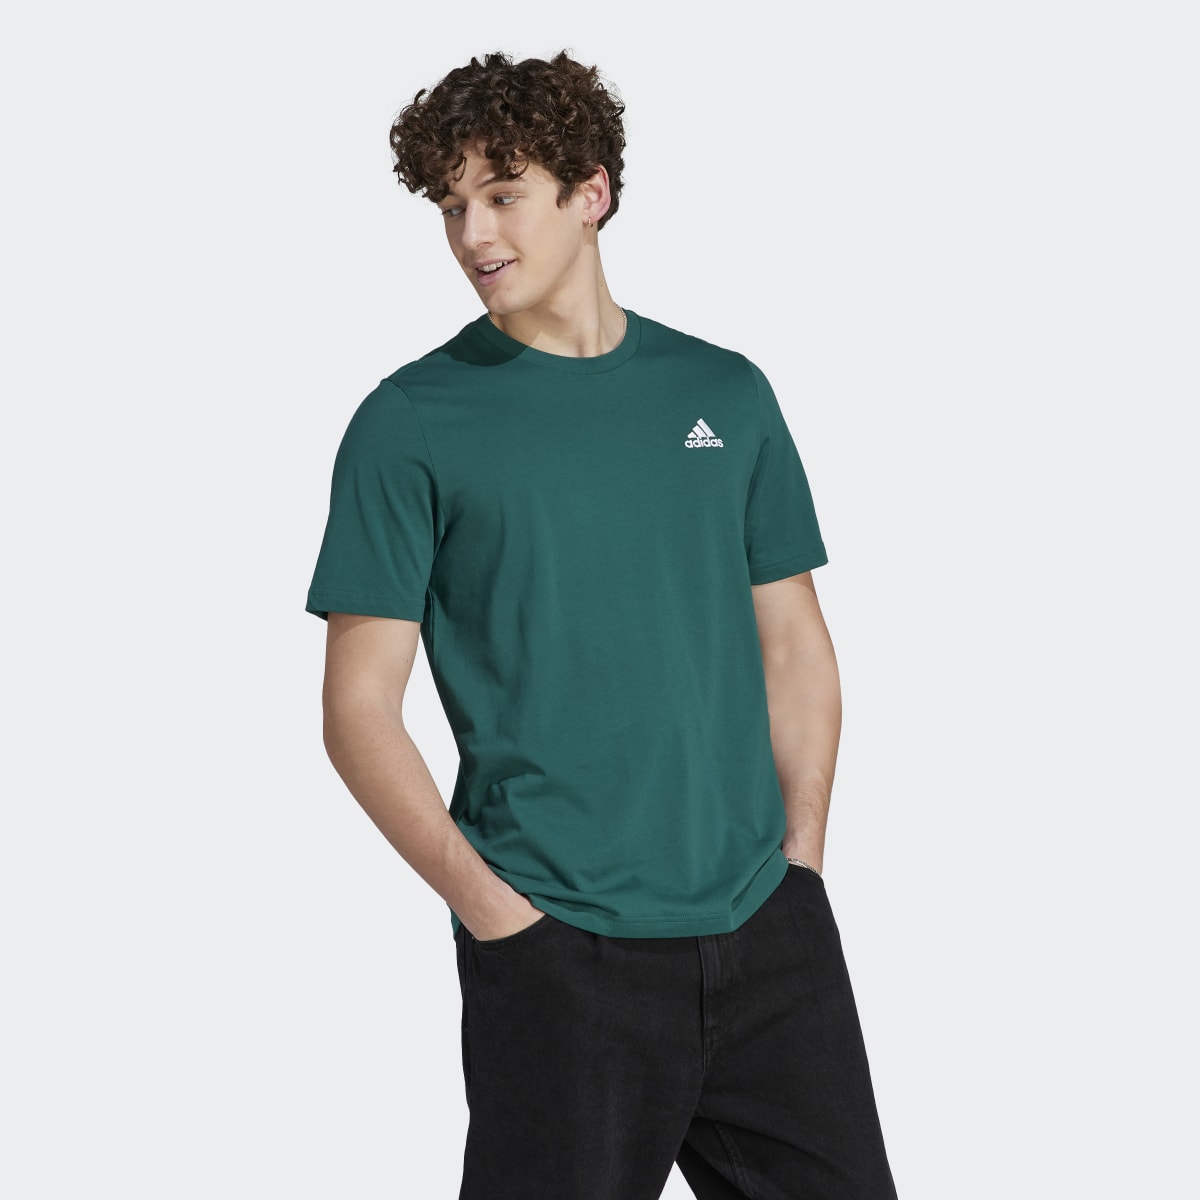 Adidas T-shirt Essentials Single Jersey Embroidered Small Logo. 4